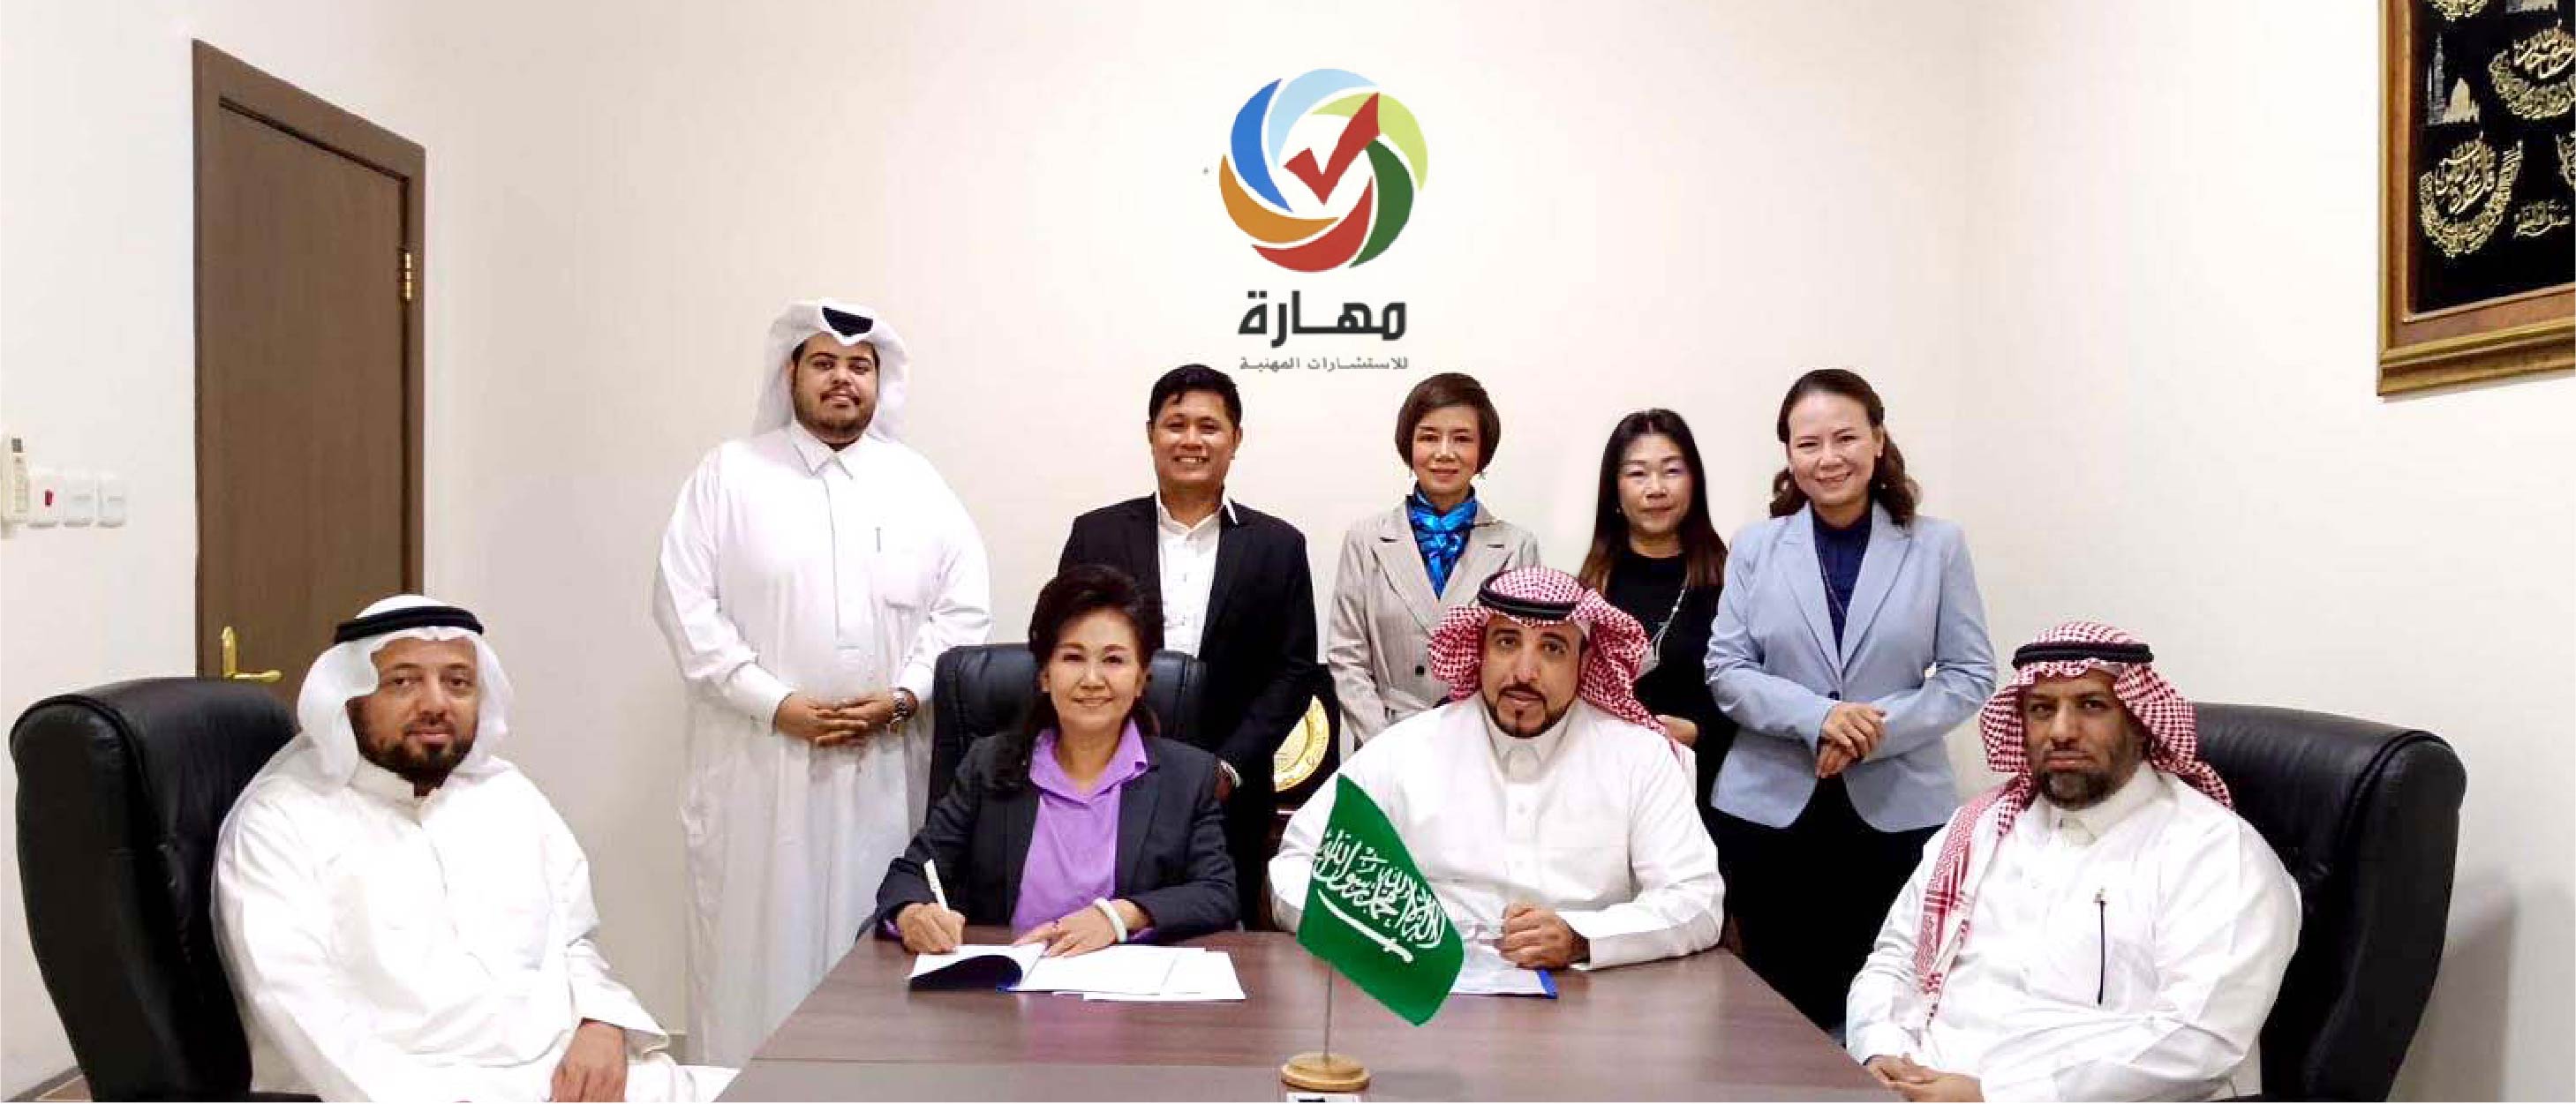 Absolute Health Group expands internationally by signing a Memorandum of Understanding (MOU) with the Mahara Company from the Kingdom of Saudi Arabia to explore bilateral collaboration.